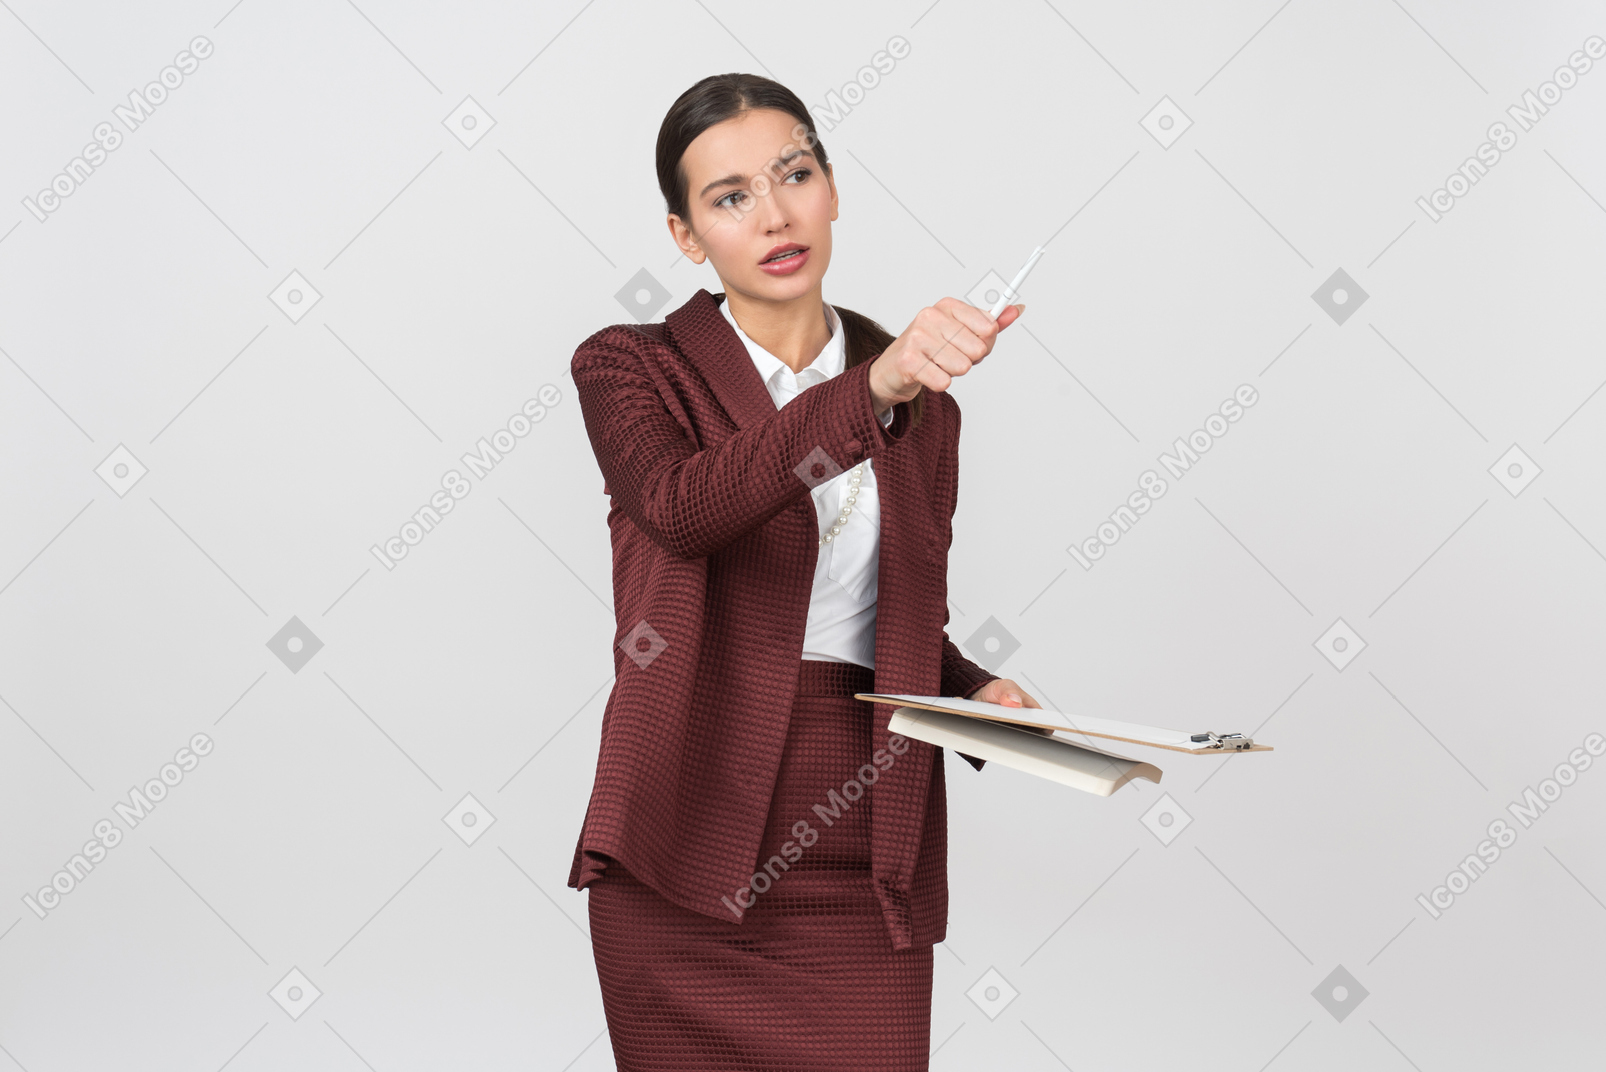 Attractive formally dressed woman with a clipboard pointing at something